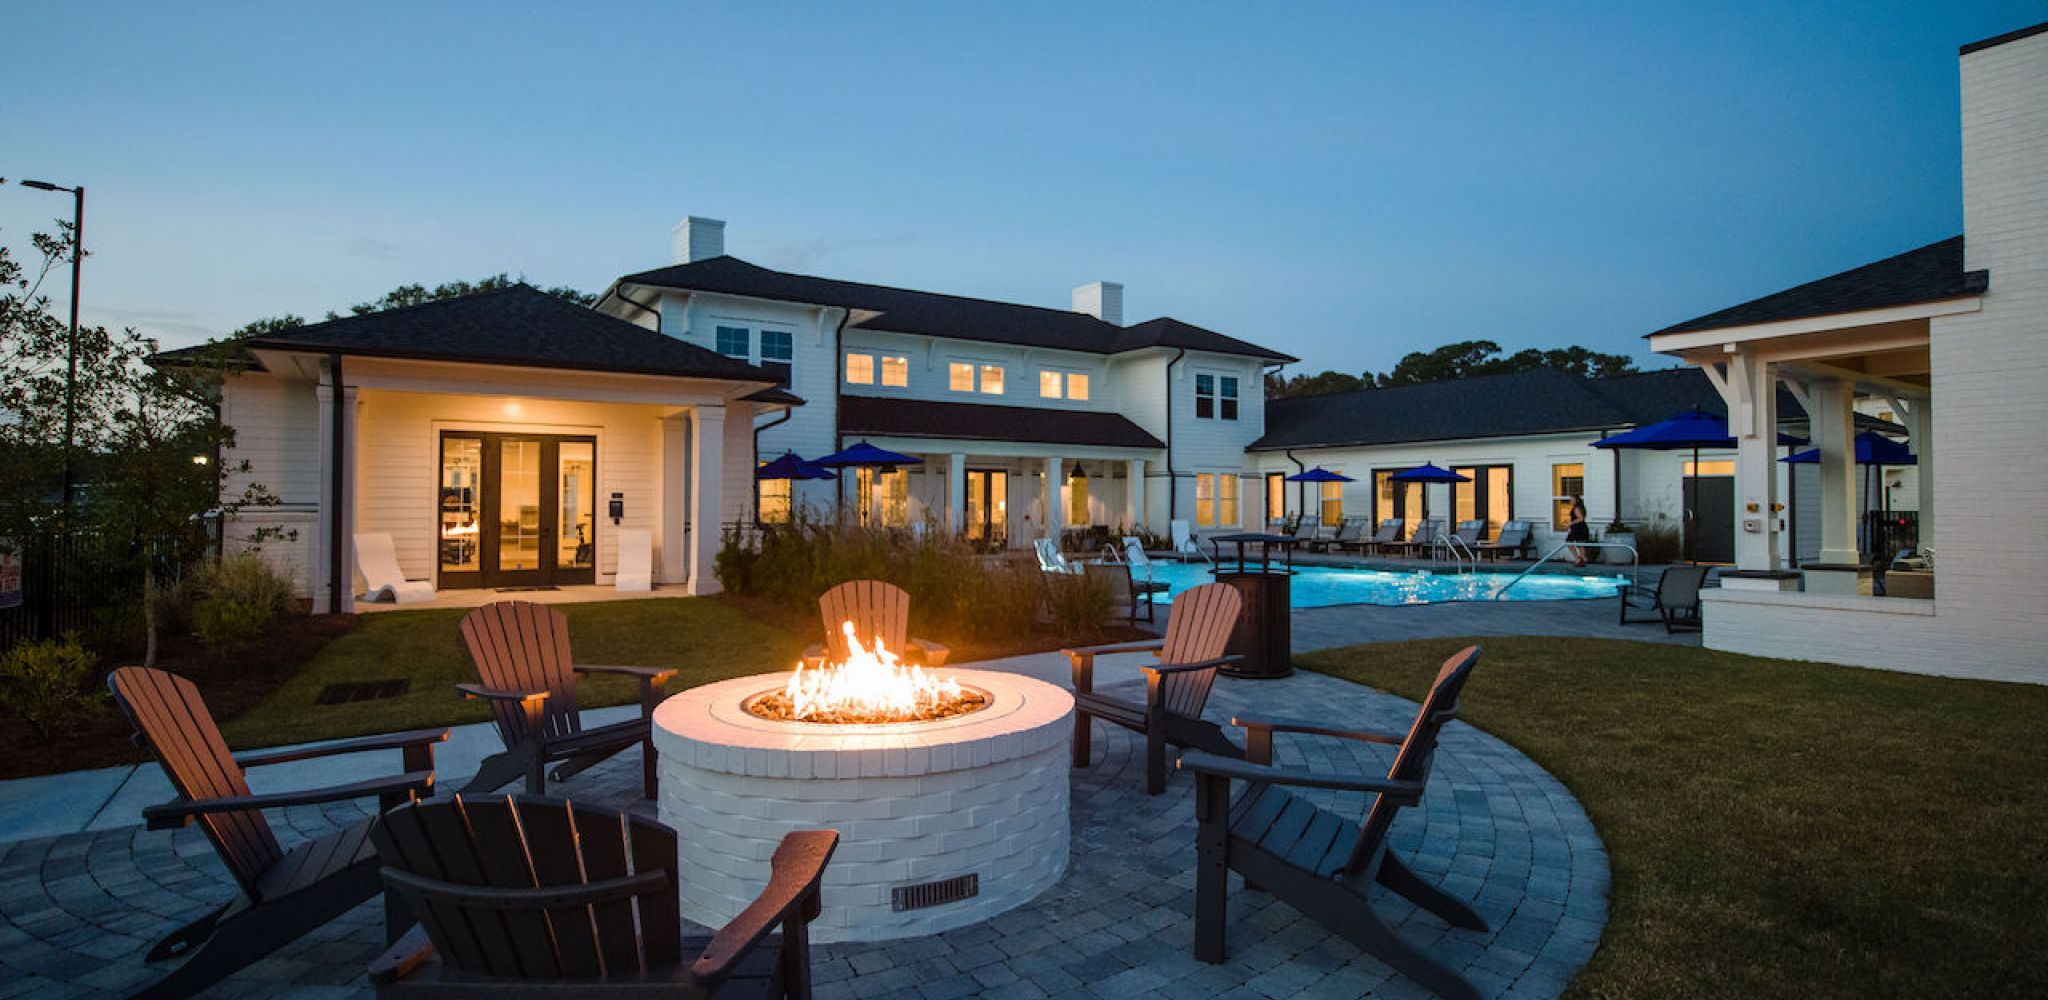 Hawthorne at the Pointe luxury outdoor pool area with fire pit and Adirondack chairs